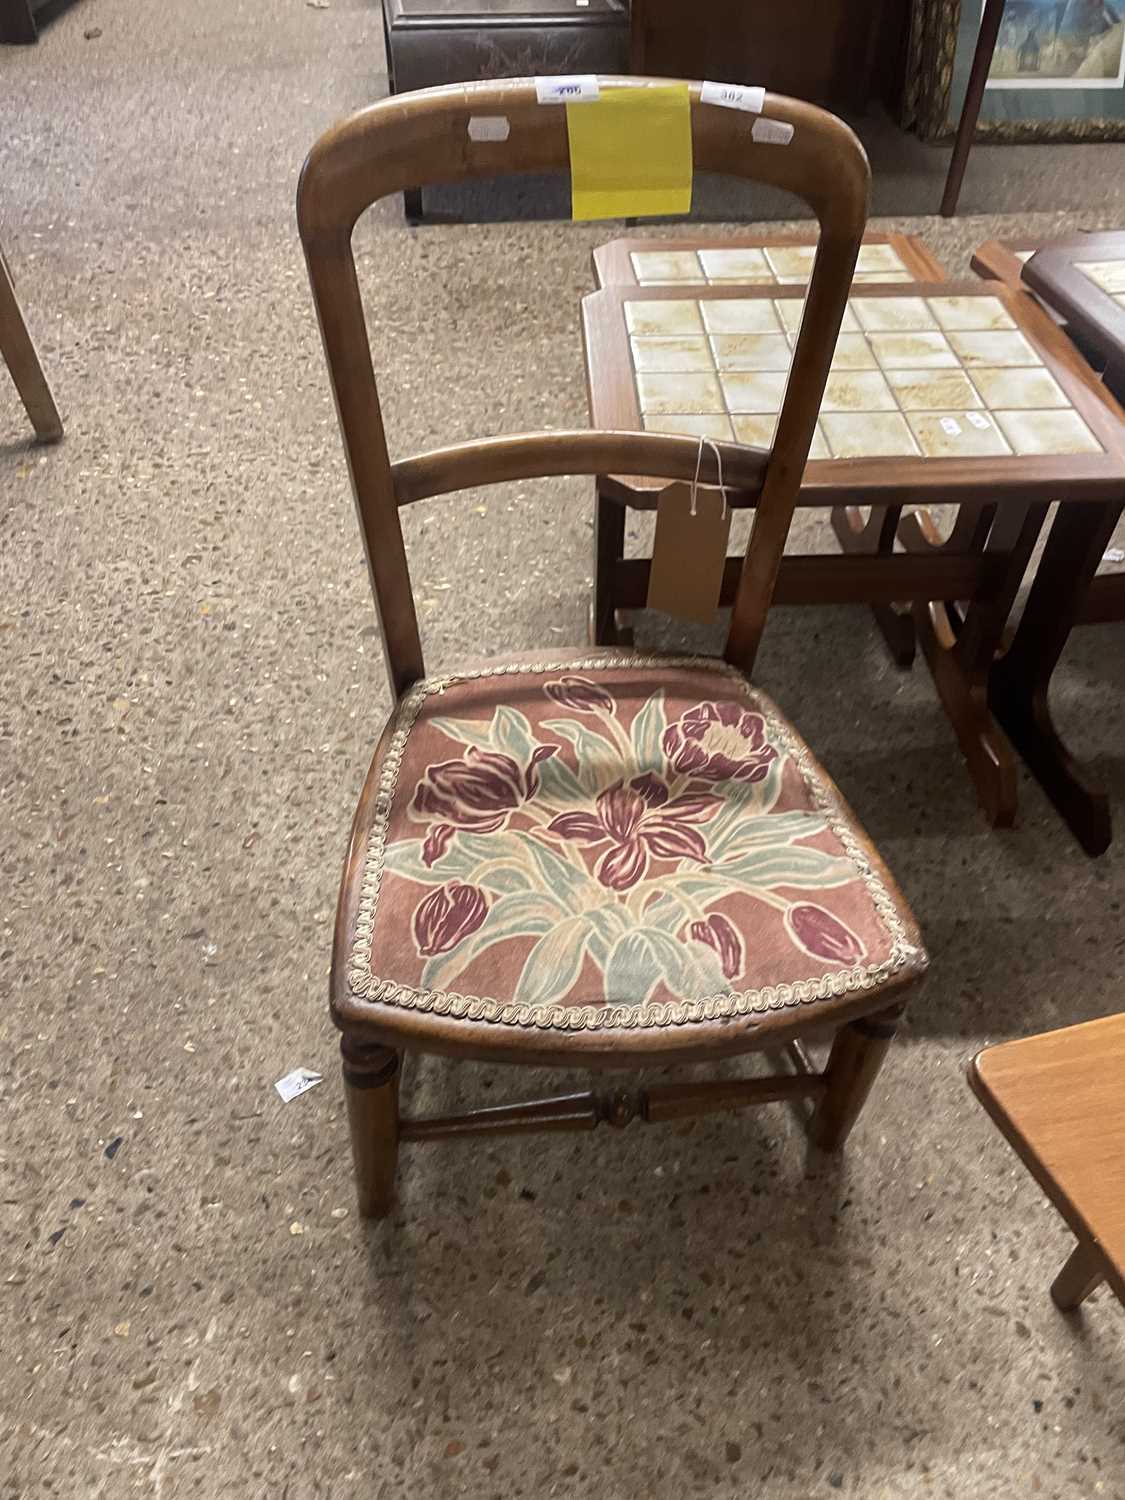 Small bedroom chair with floral upholstered seat